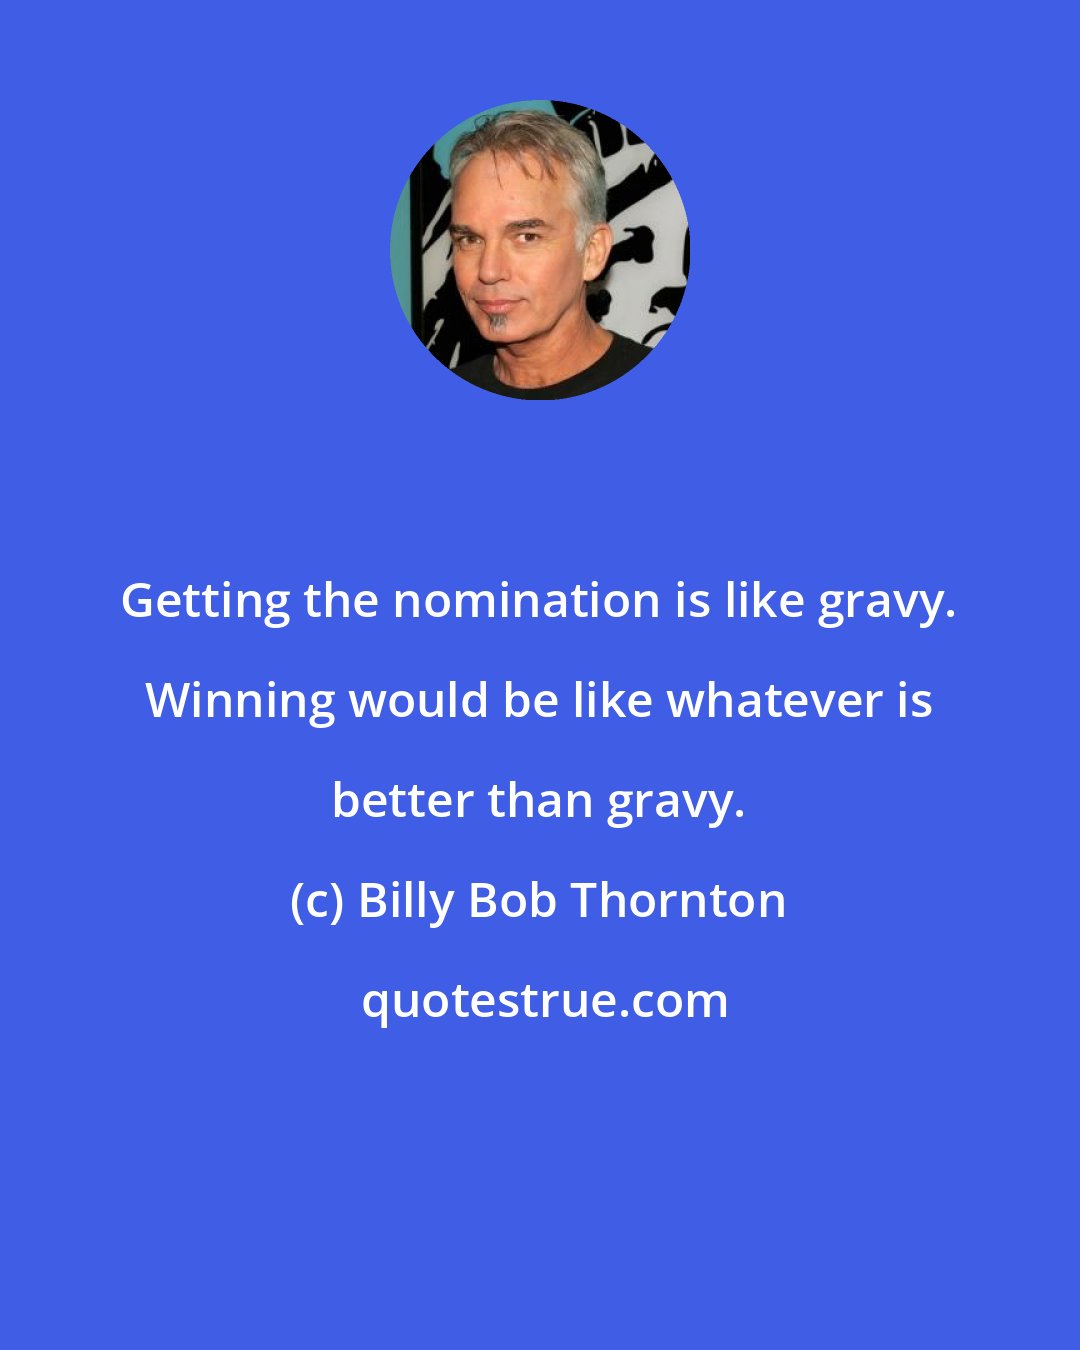 Billy Bob Thornton: Getting the nomination is like gravy. Winning would be like whatever is better than gravy.